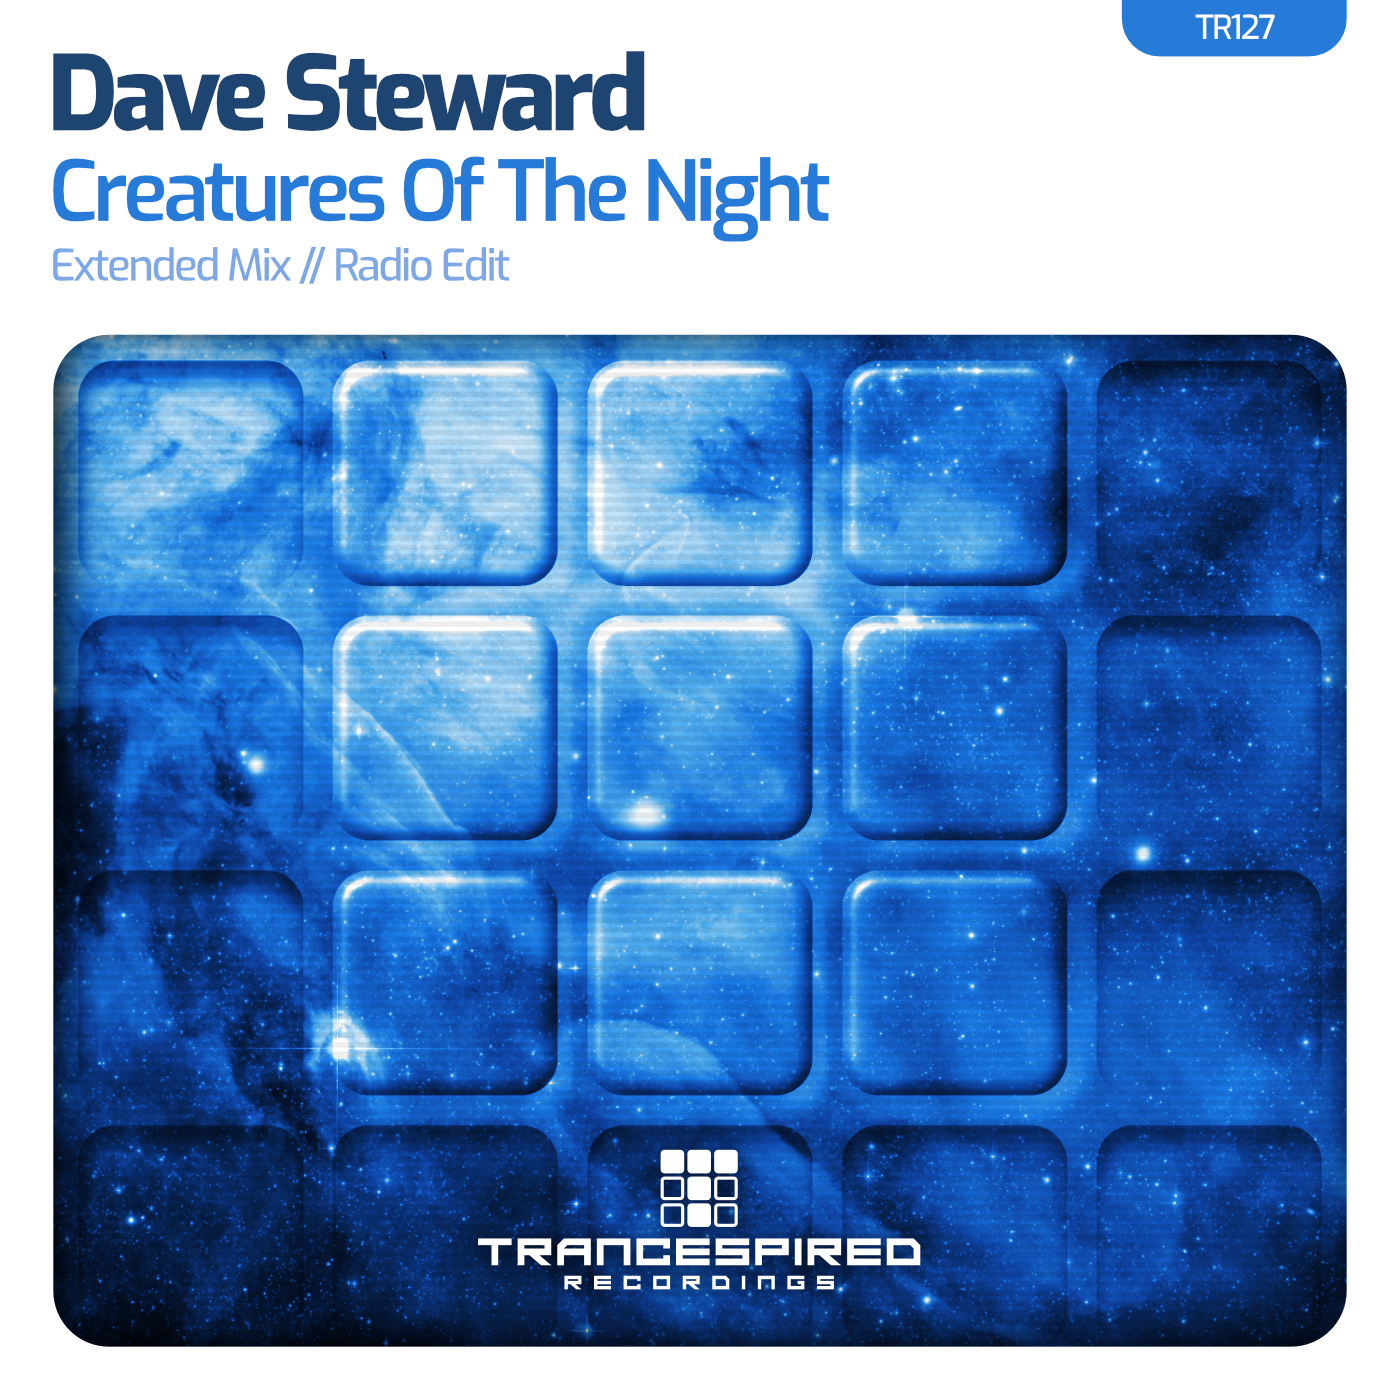 Dave Steward presents Creatures Of The Night on Trancespired Recordings